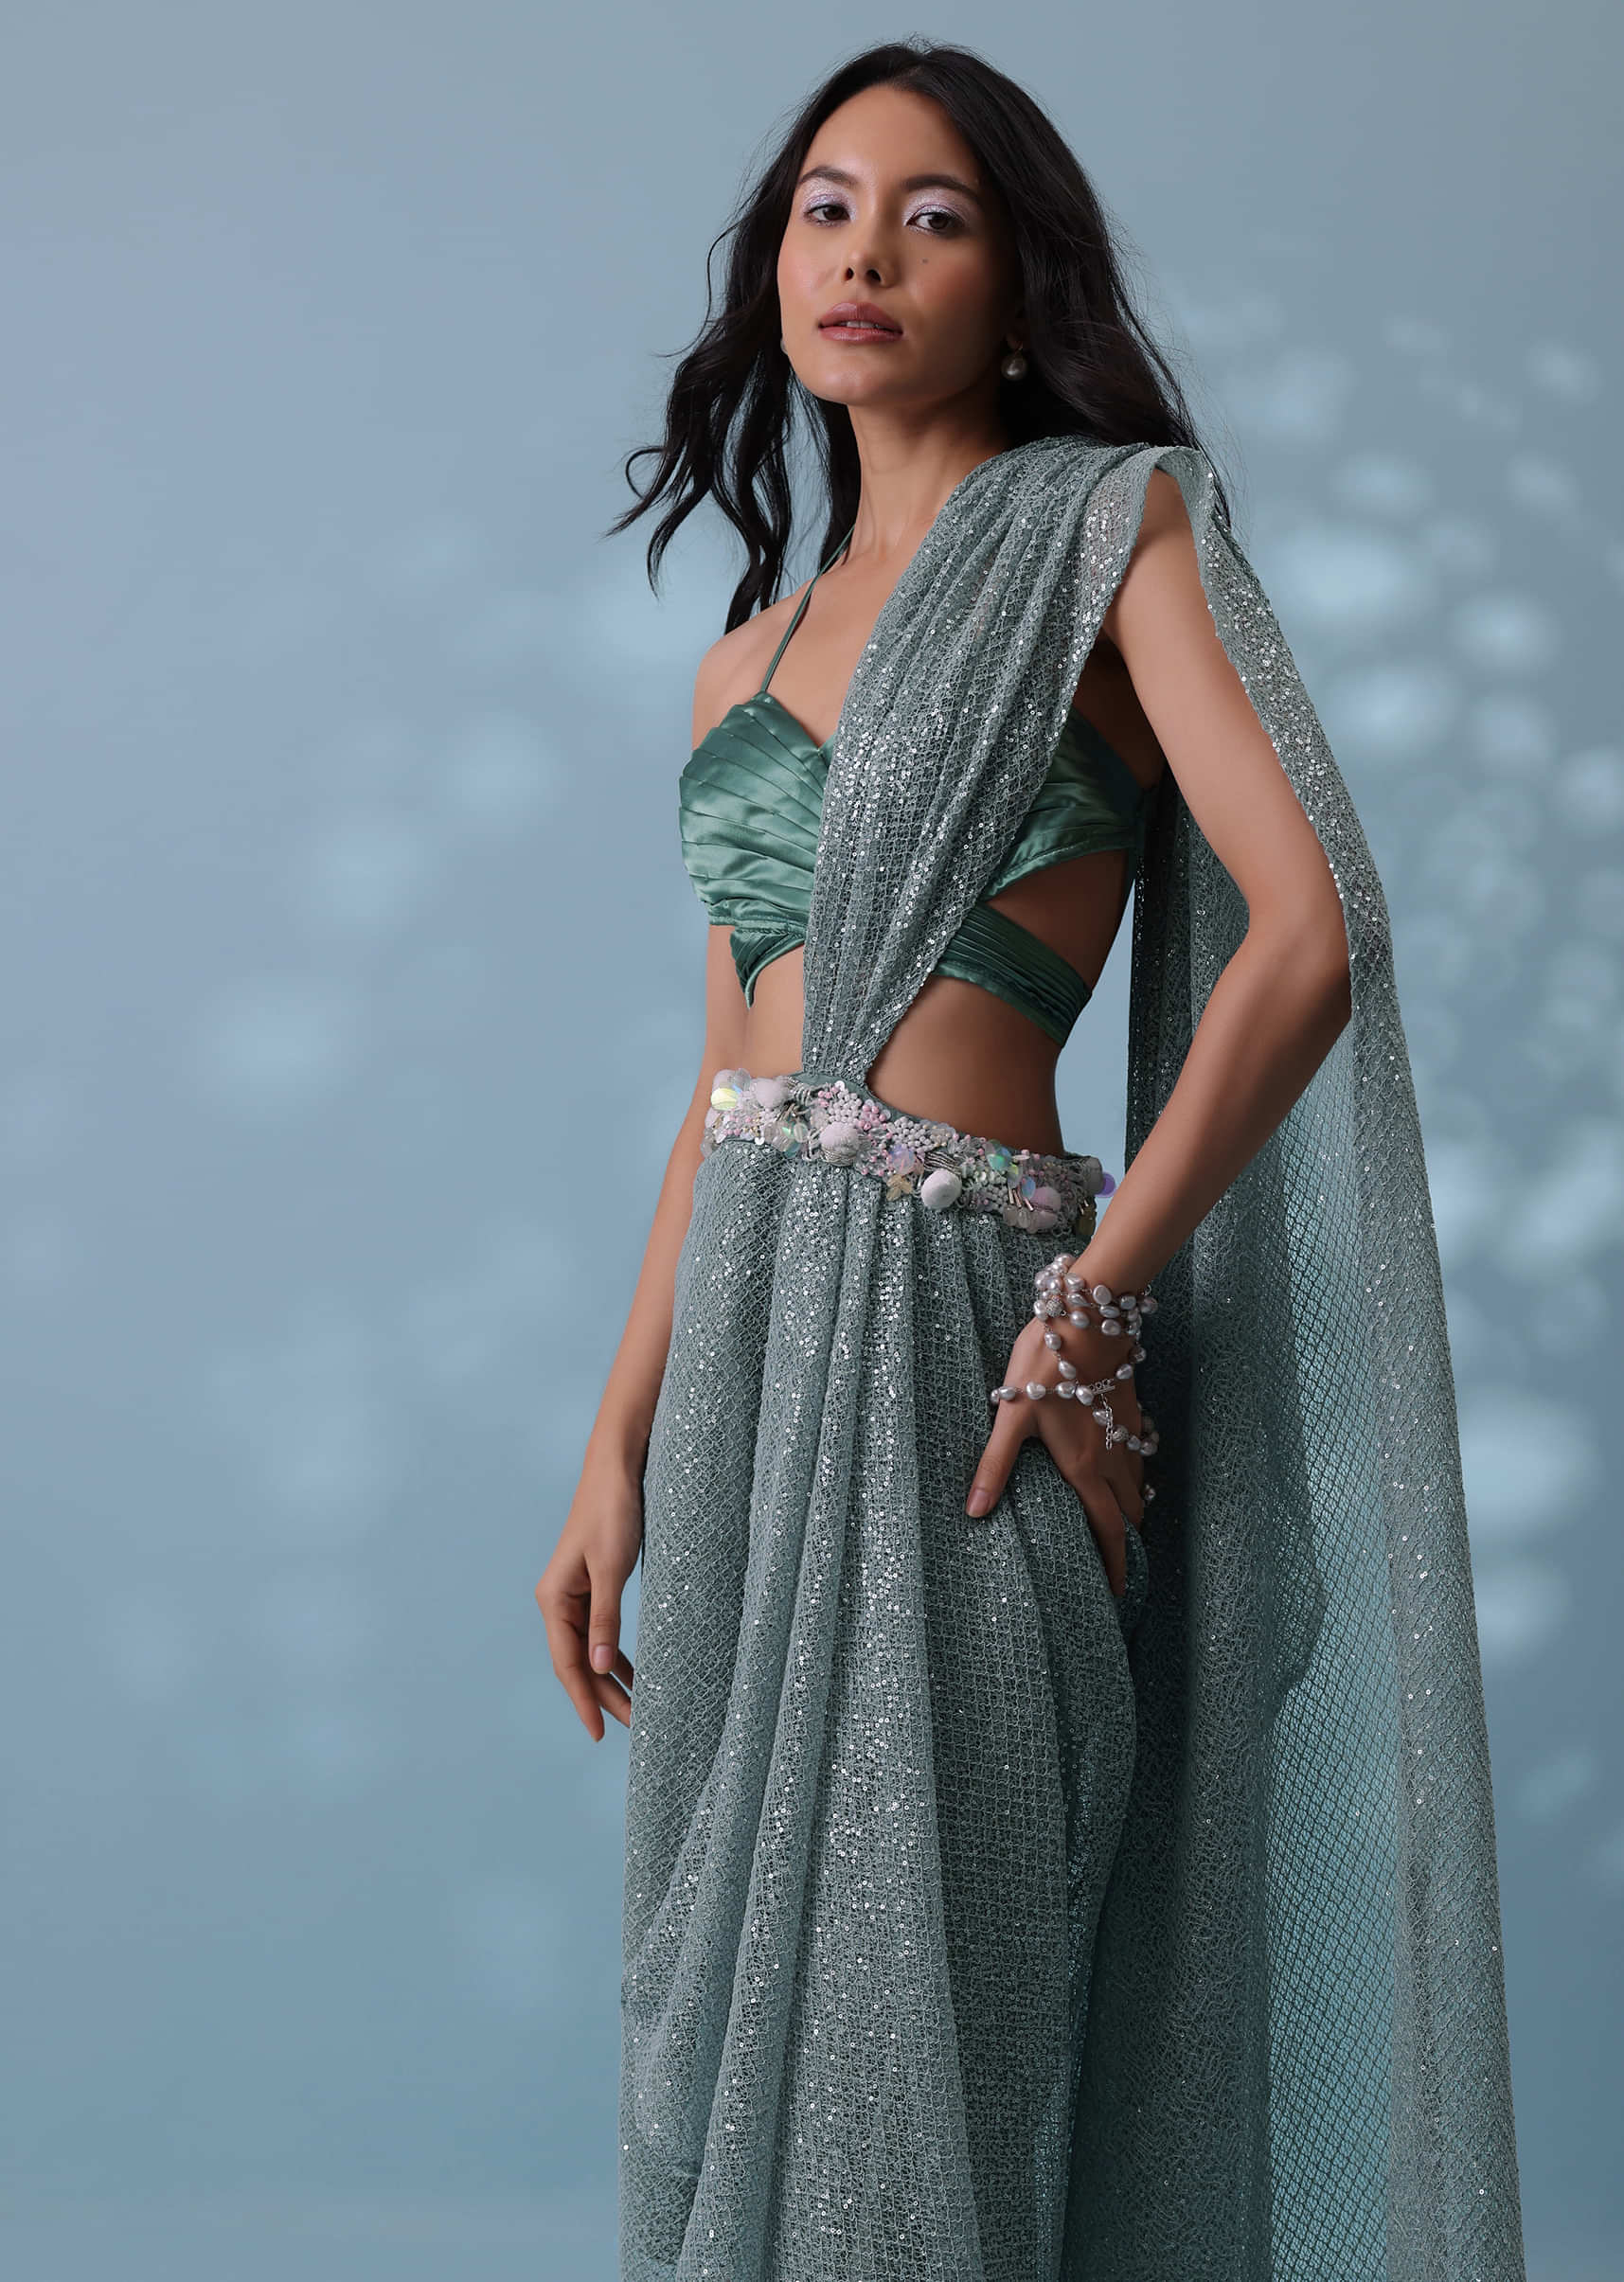 Mint Green Indowestern Ready-To-Wear Drape Saree With Strap Blouse In Sequins